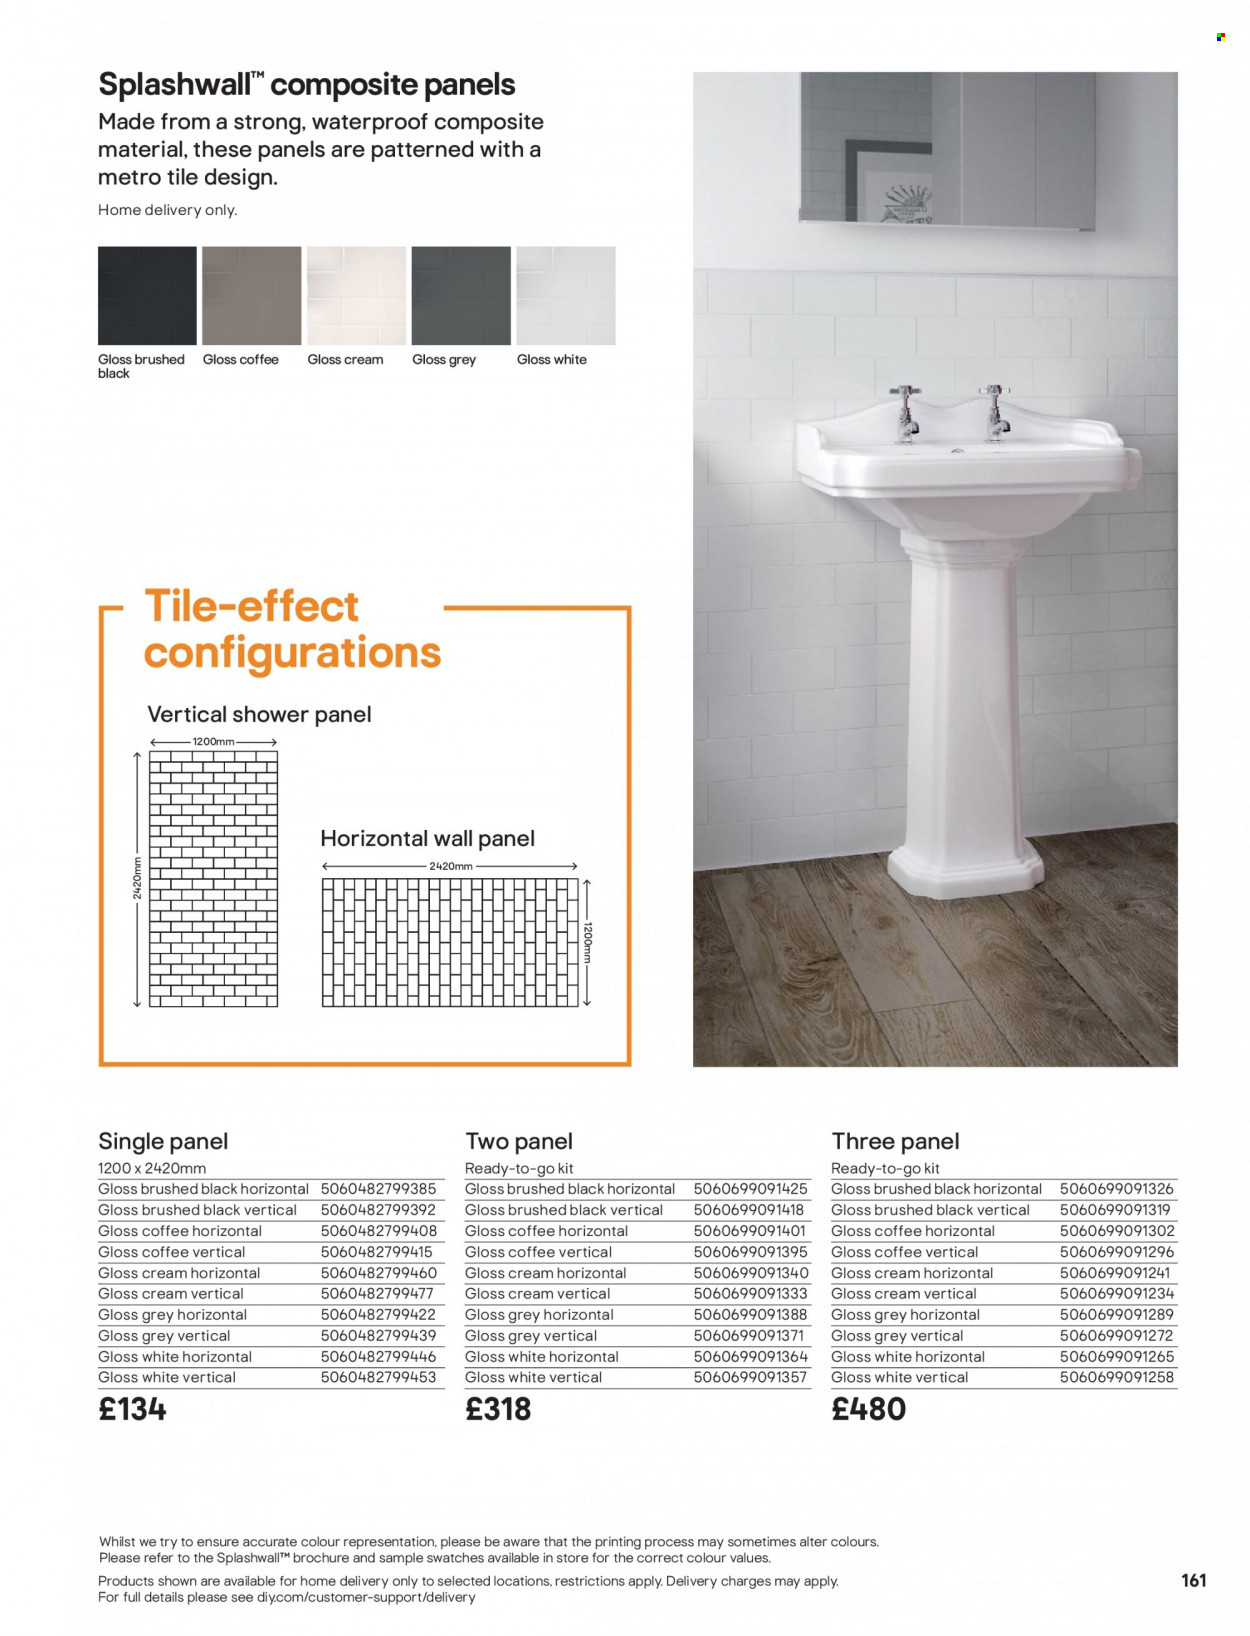 B&Q offer . Page 161.